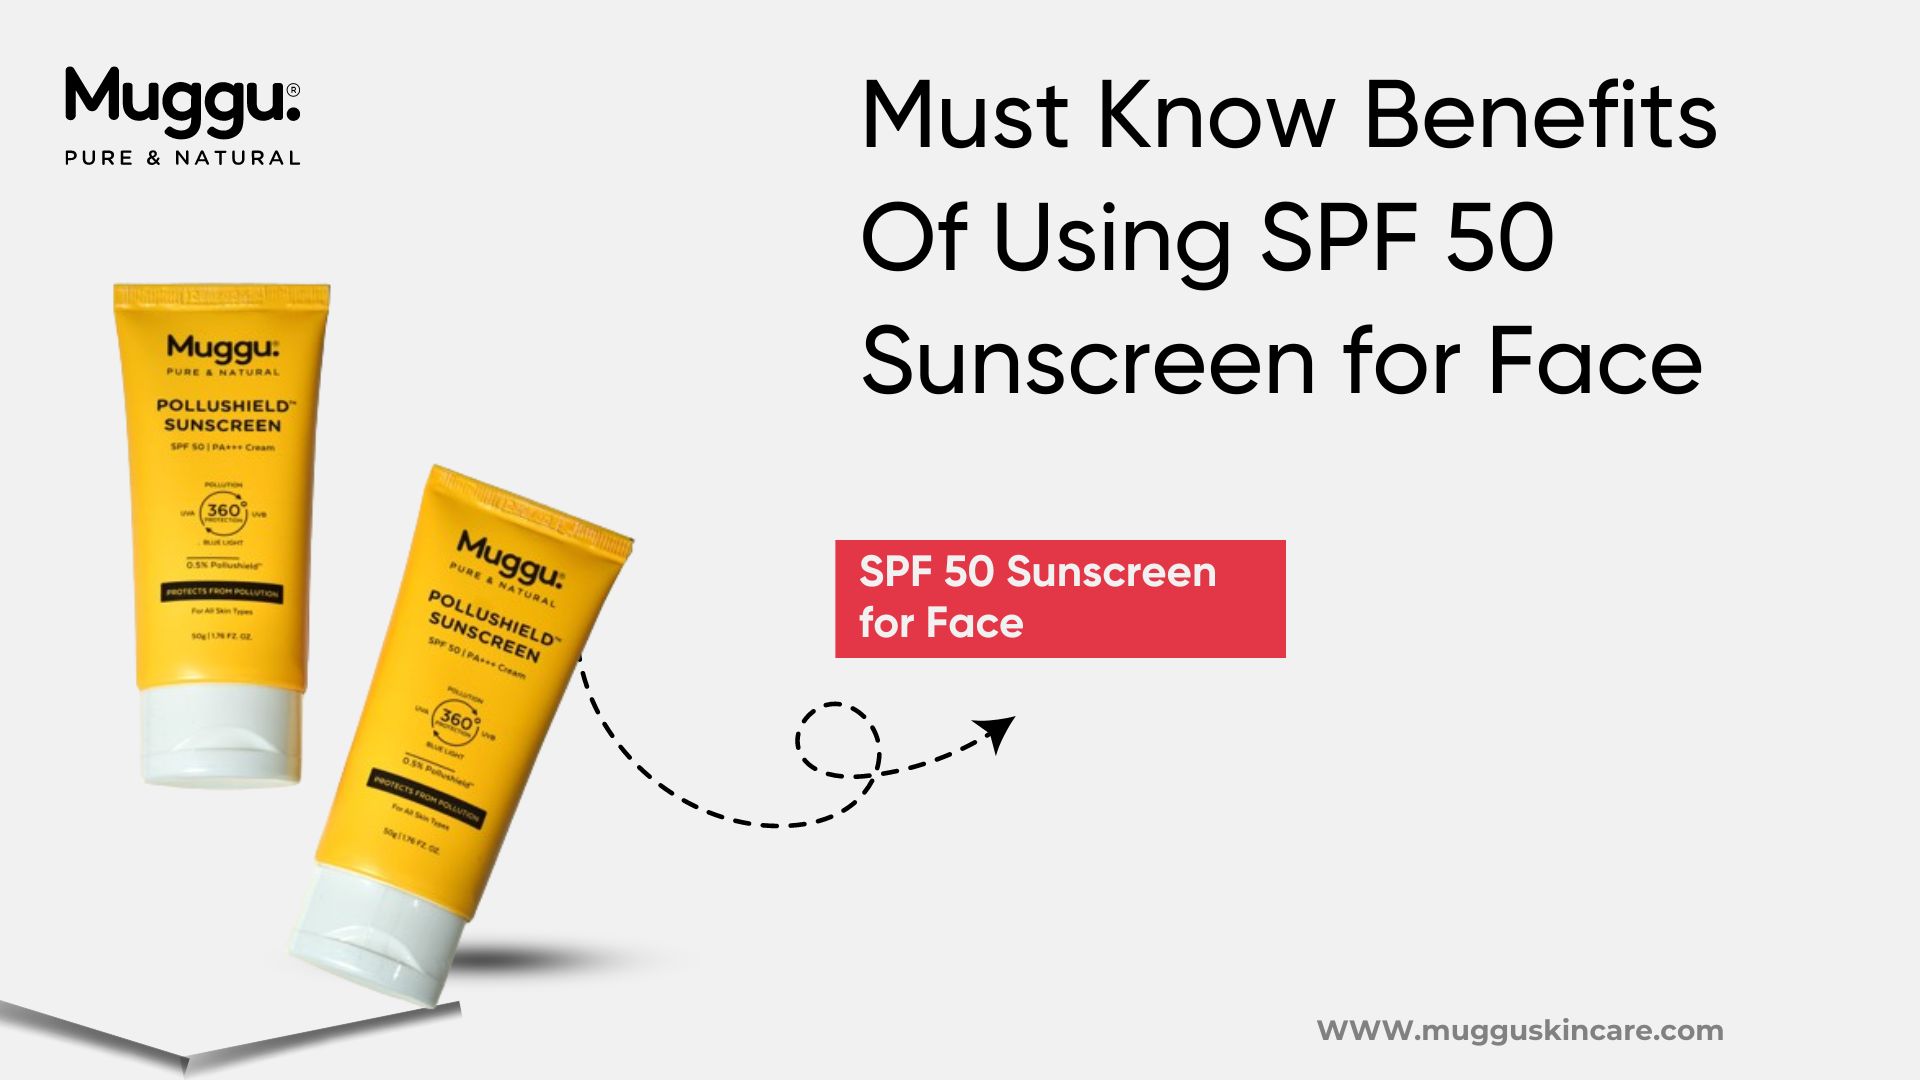 Must Know Benefits Of Using SPF 50 Sunscreen for Face